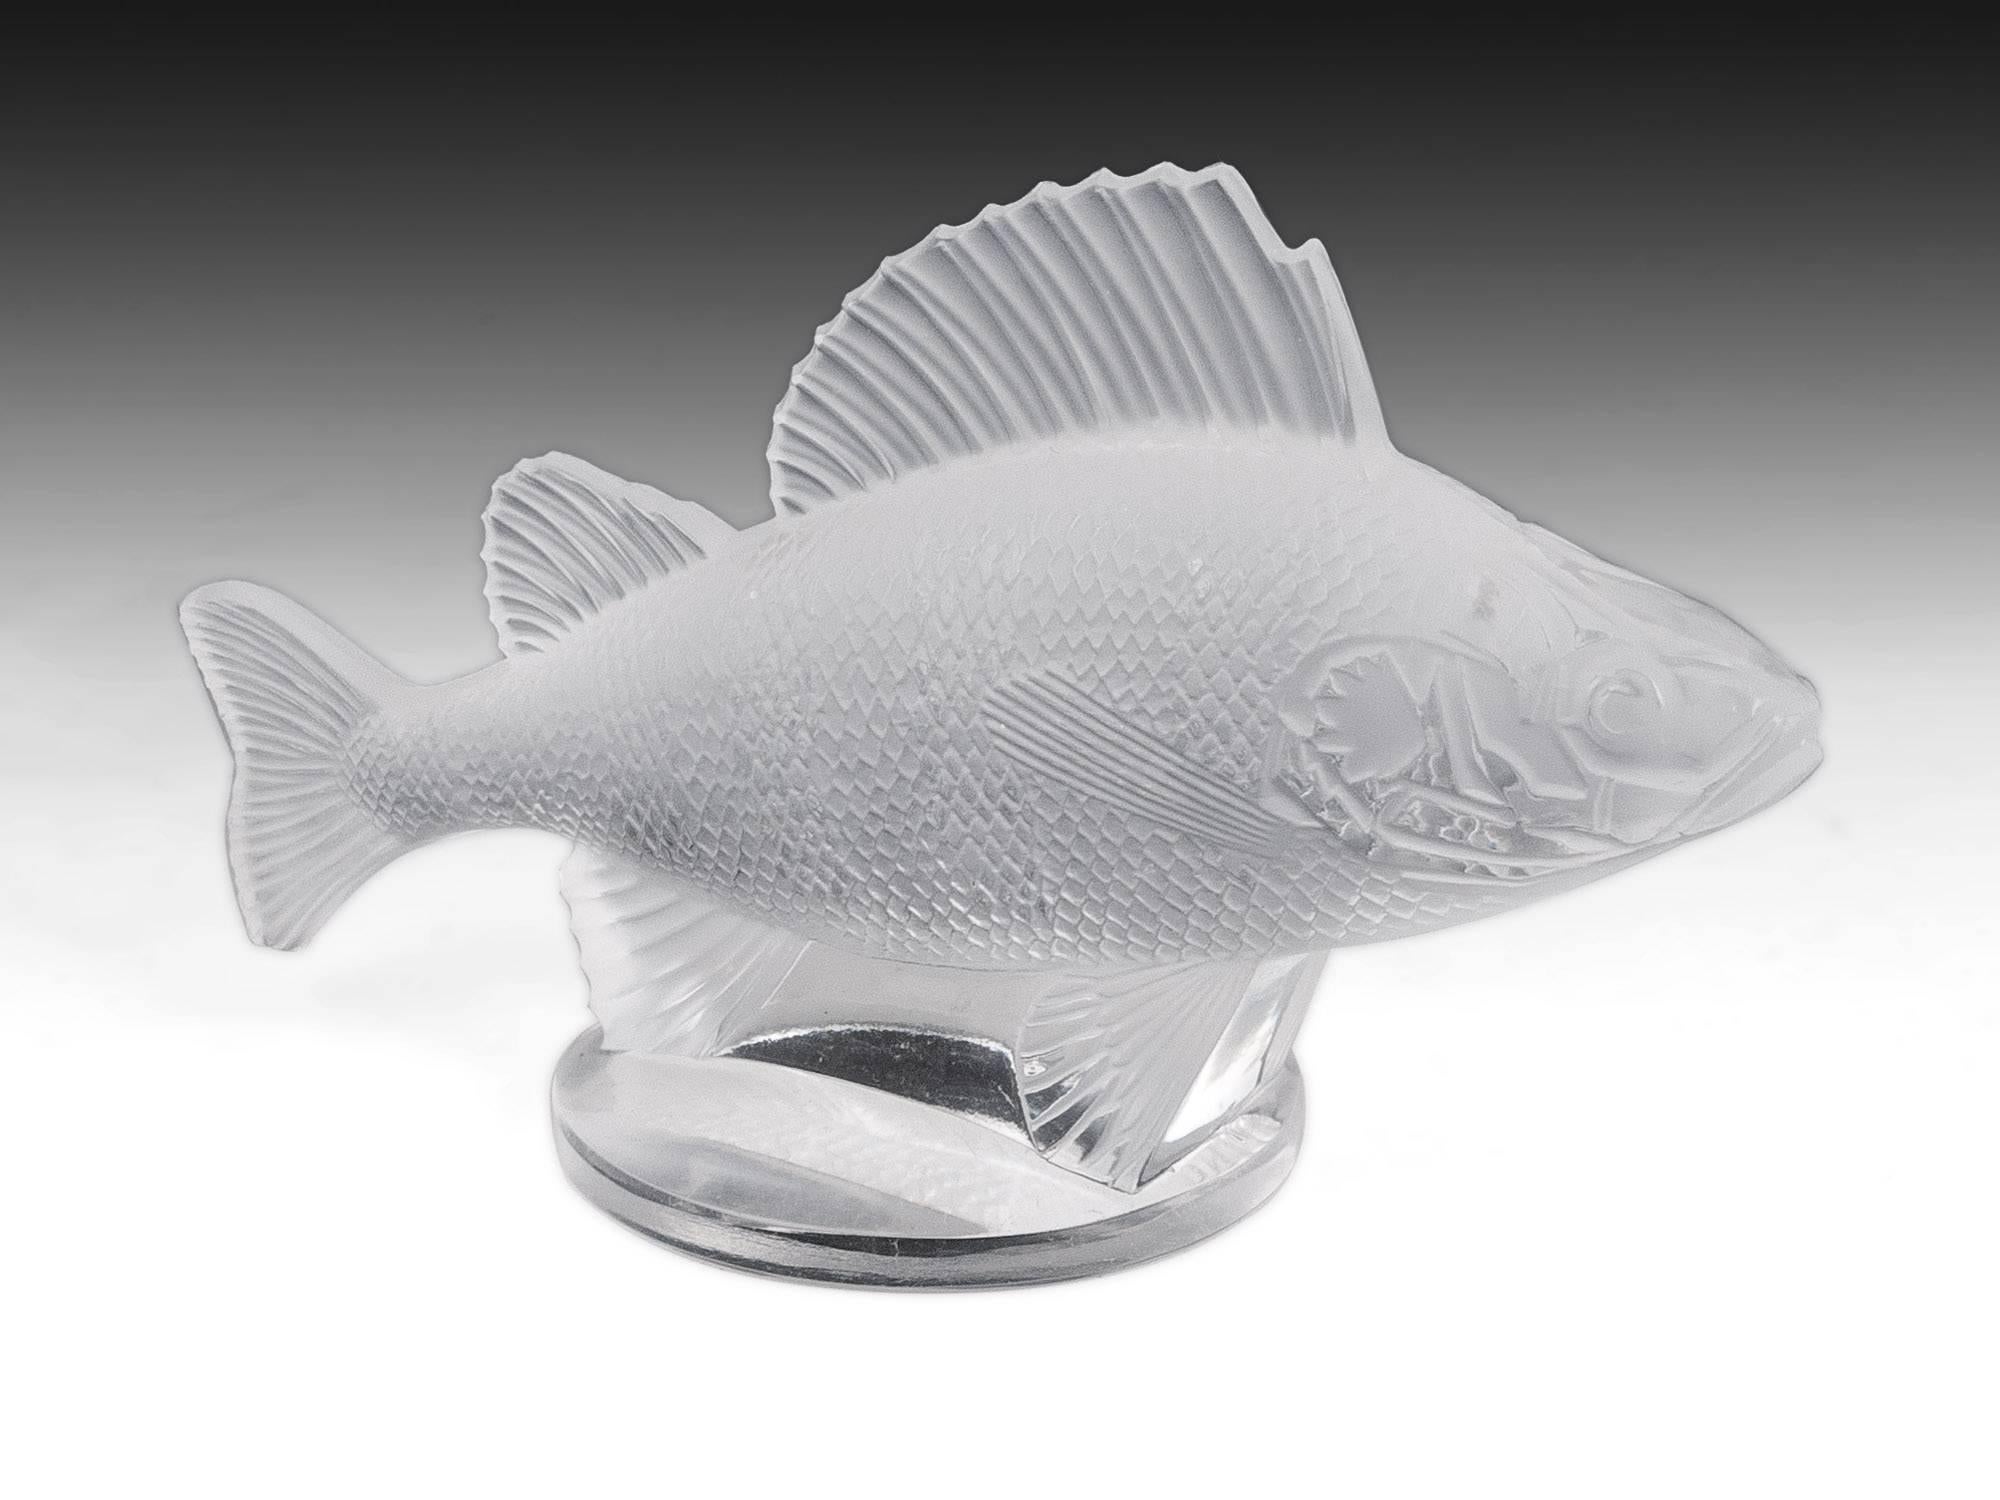 Small Lalique Perche Poisson / perch fish car mascot. Model number: 1158.

These are made as car hood ornaments in the 1920s by famous glass make René Jules Lalique, who started a company using his own name, which still creates Fine glassware